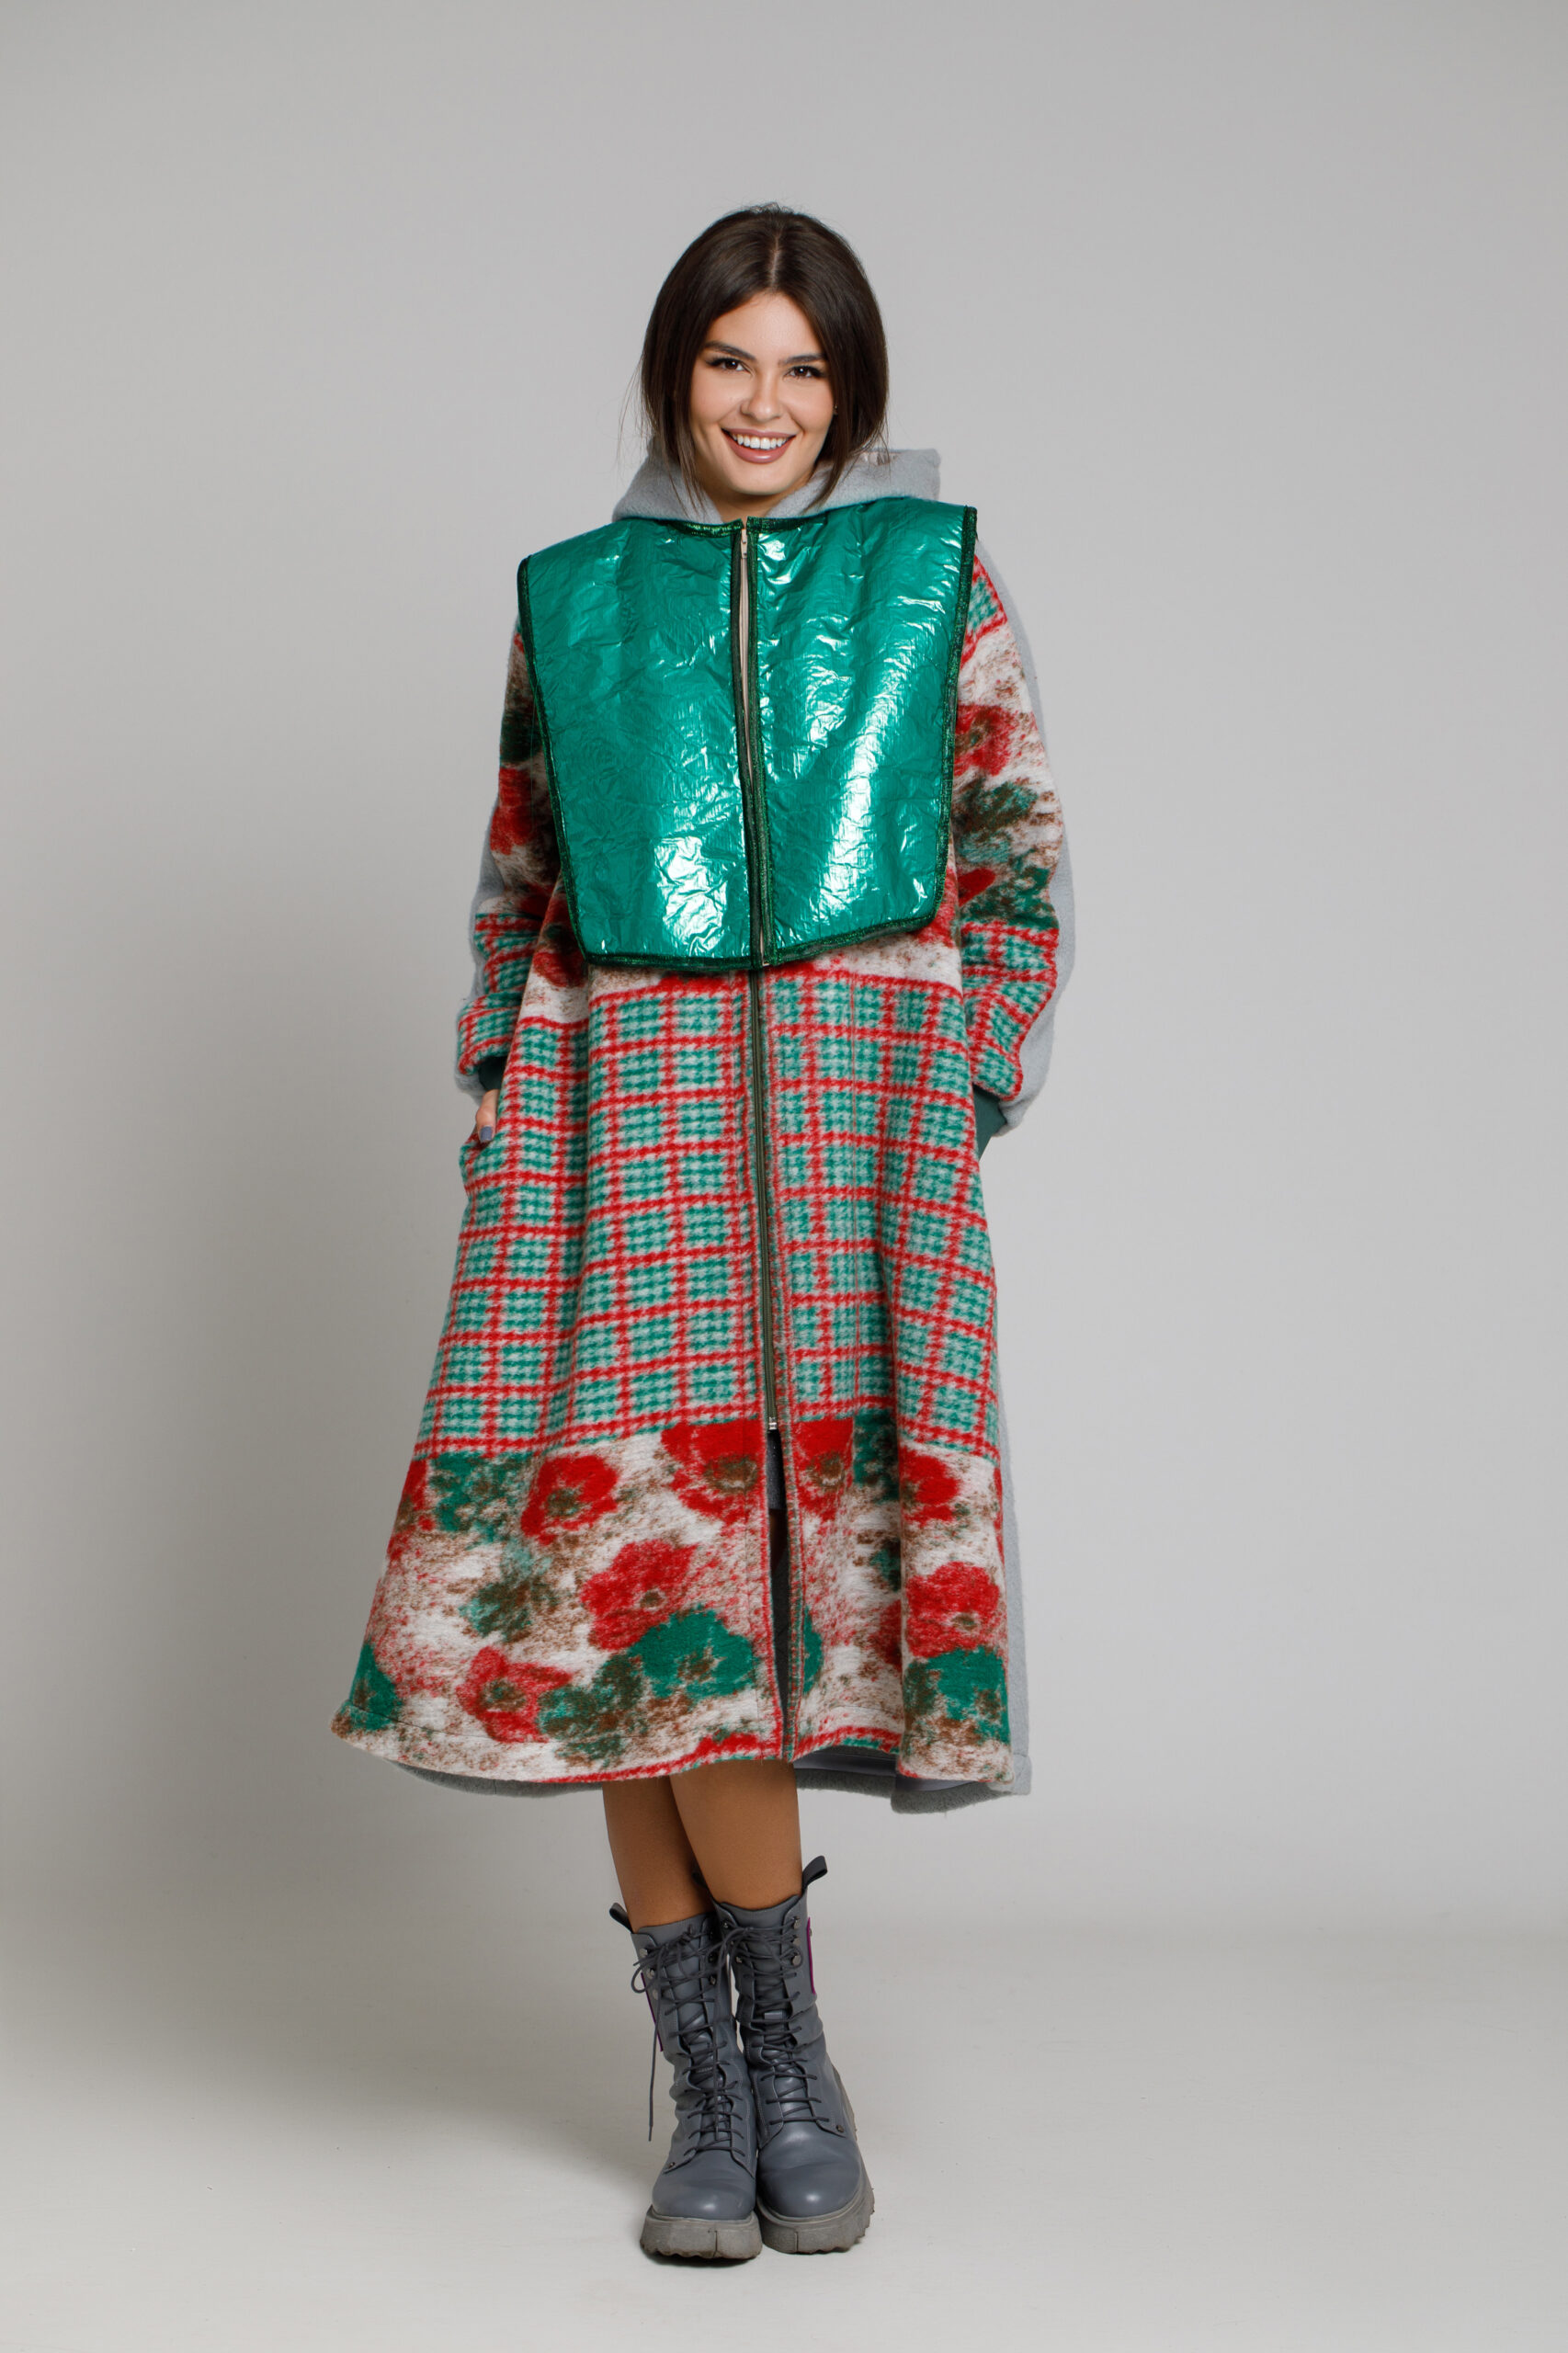 Gray BETINA overcoat with detachable emerald green quilted waistcoat. Natural fabrics, original design, handmade embroidery